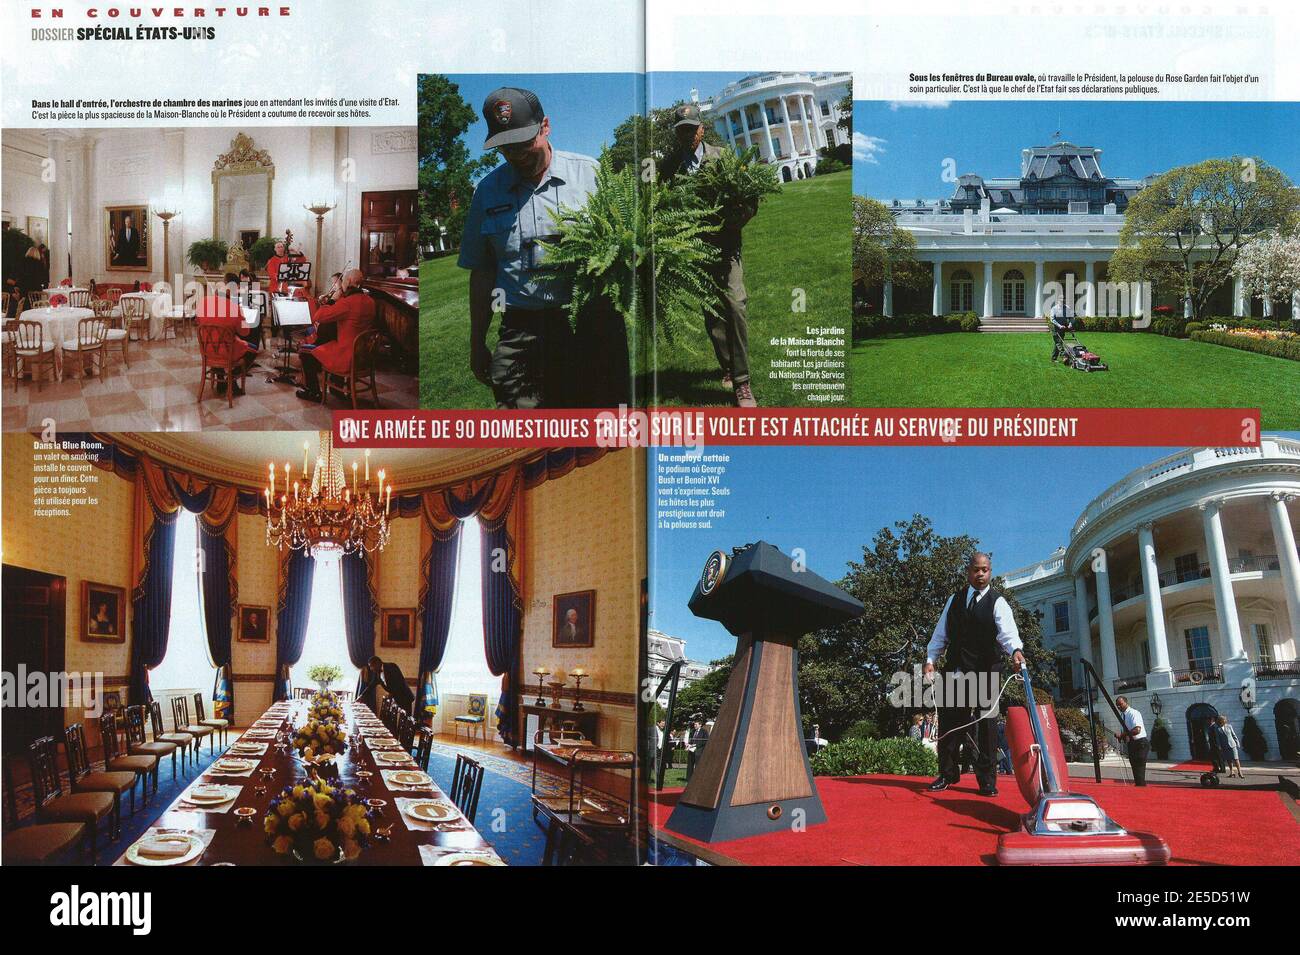 Published in Le Figaro Magazine October 31, 2008 issue. Behind the scenes pictures at the White House in Washington, DC, USA. Photo by Olivier Douliery/ABACAPRESS.COM Local Caption 168597 001 Stock Photo